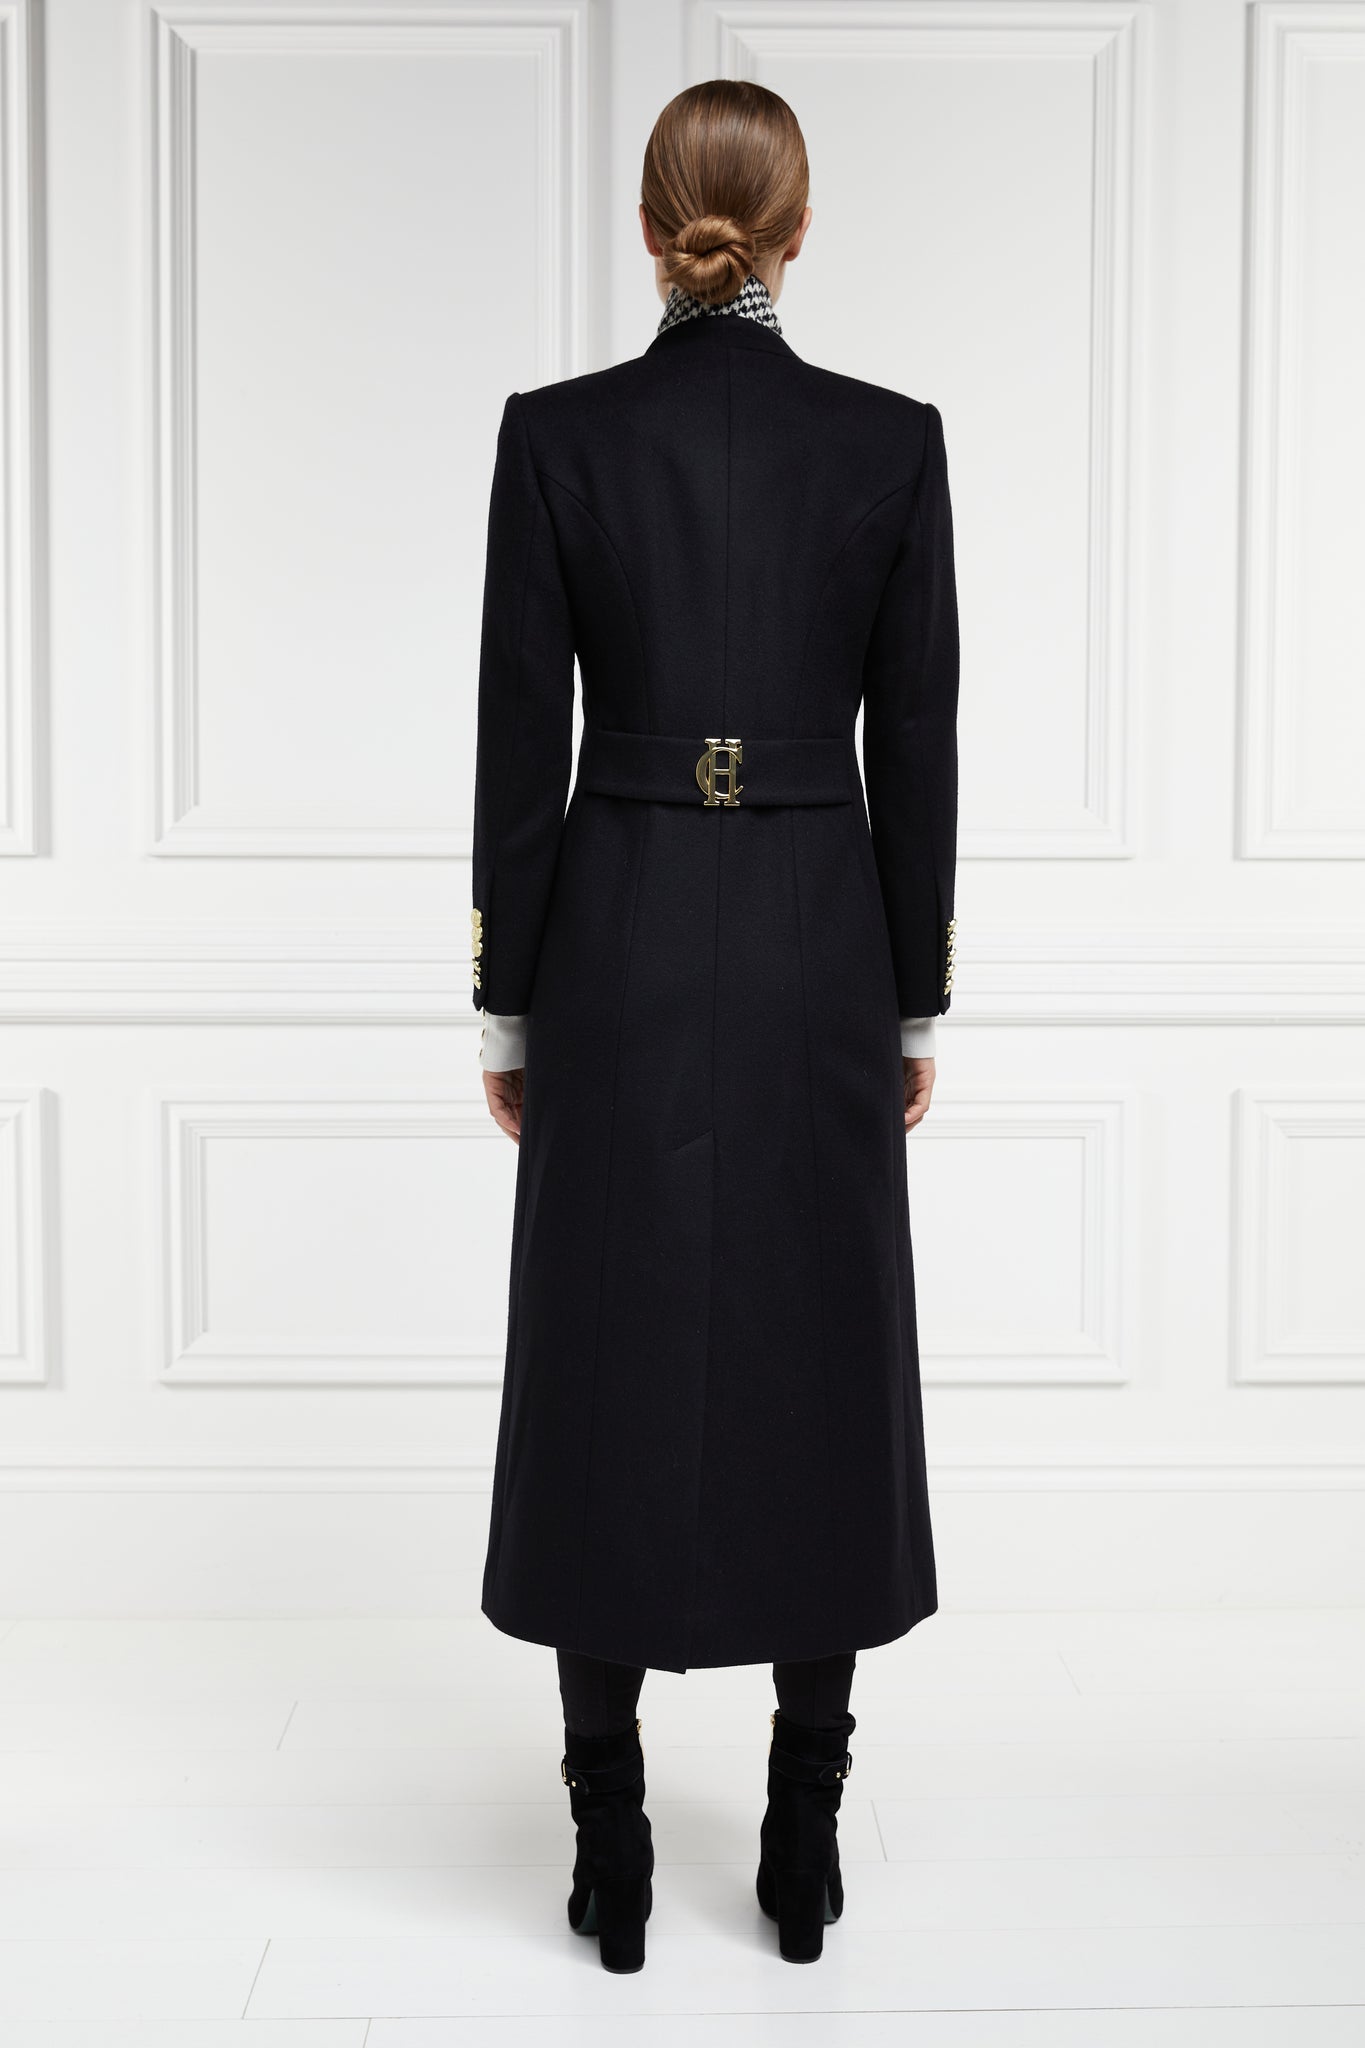 black single breasted full length wool coat with black and white houndstooth under collar detail and gold HC